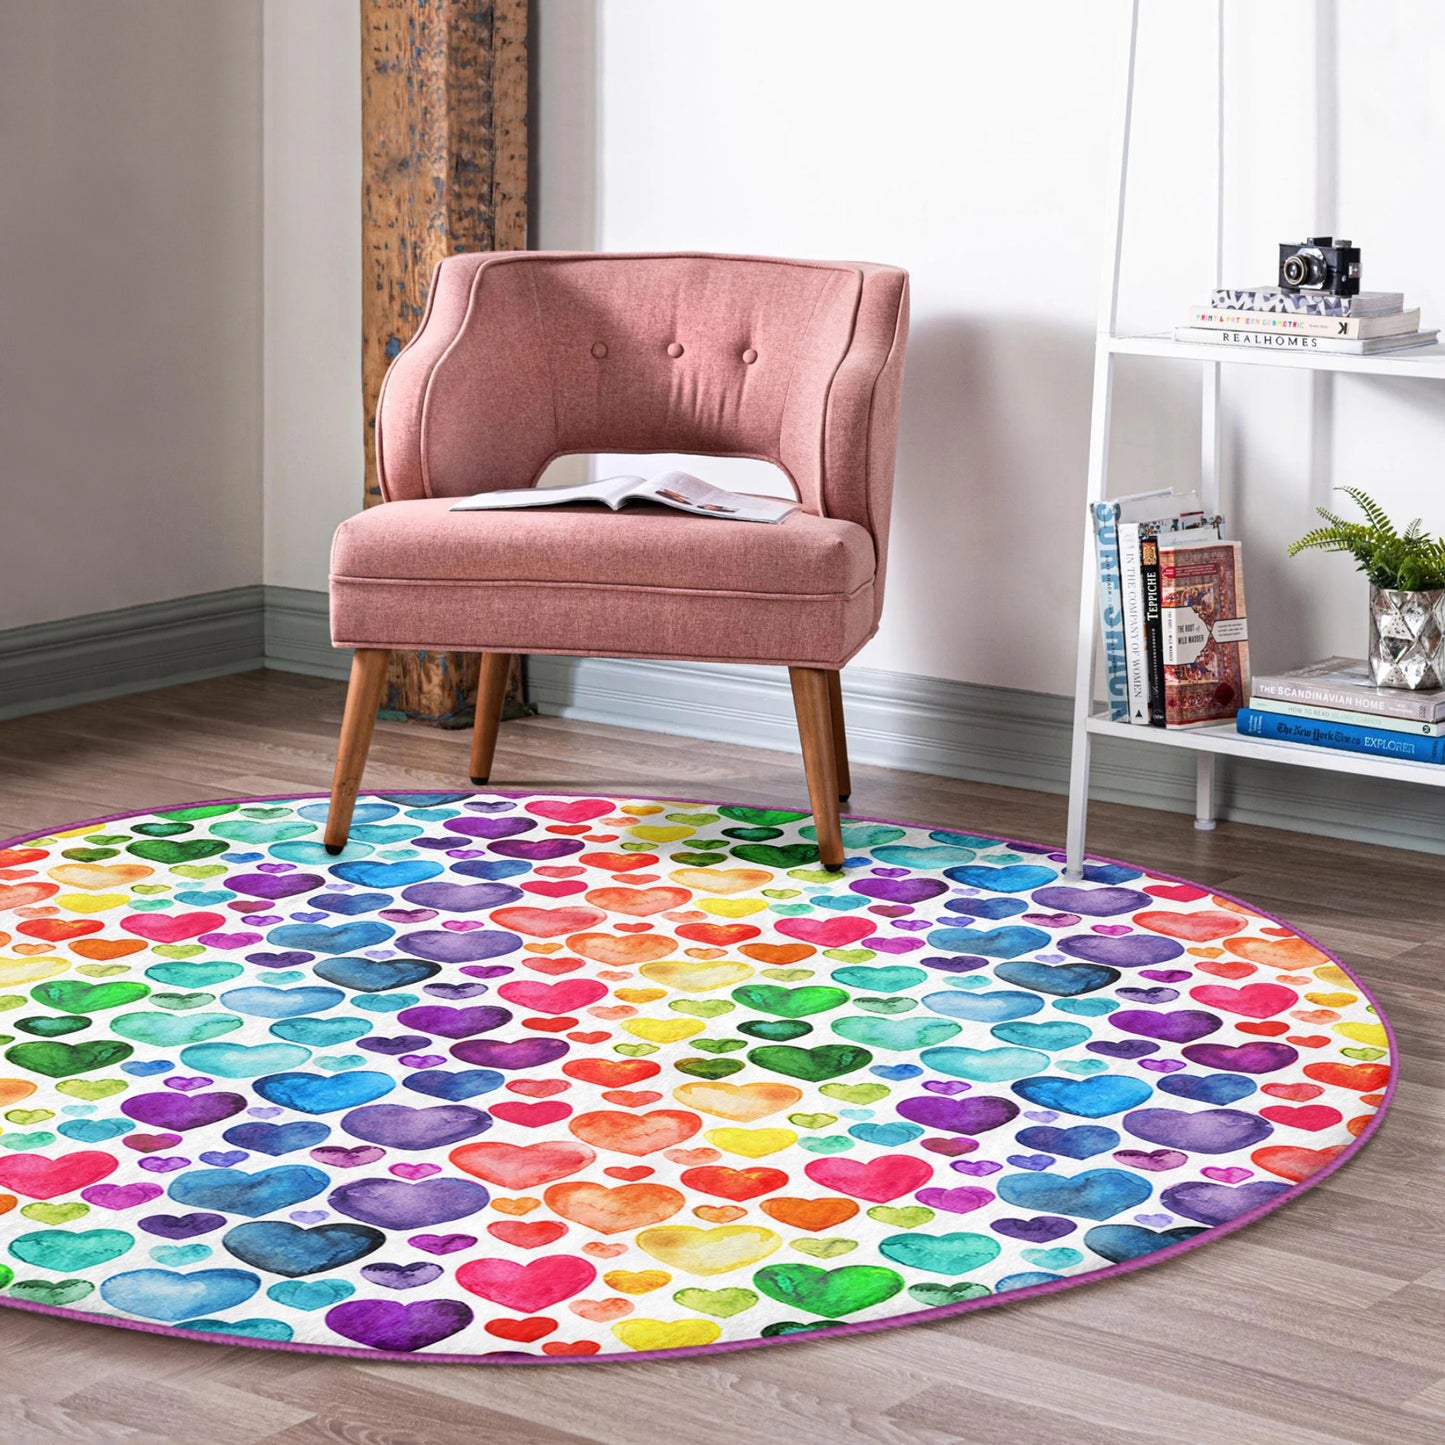 Round Patterned Floor Rug - Whimsical Accent